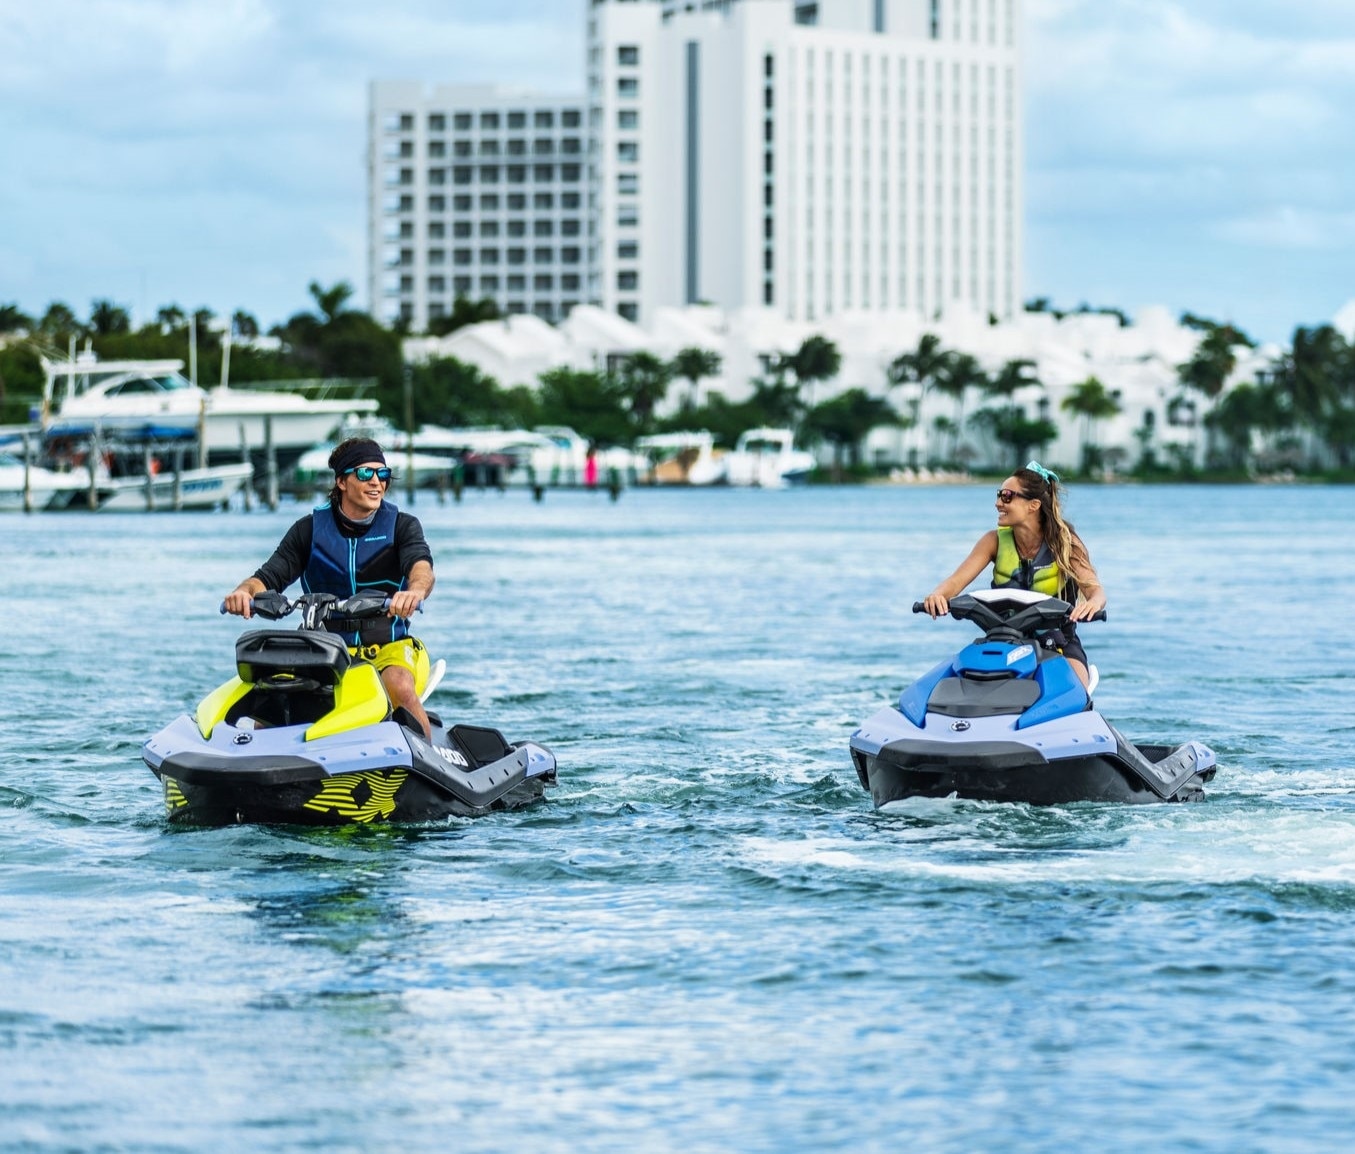 Win a new Personal Flotation Device (PFD) from Sea-Doo